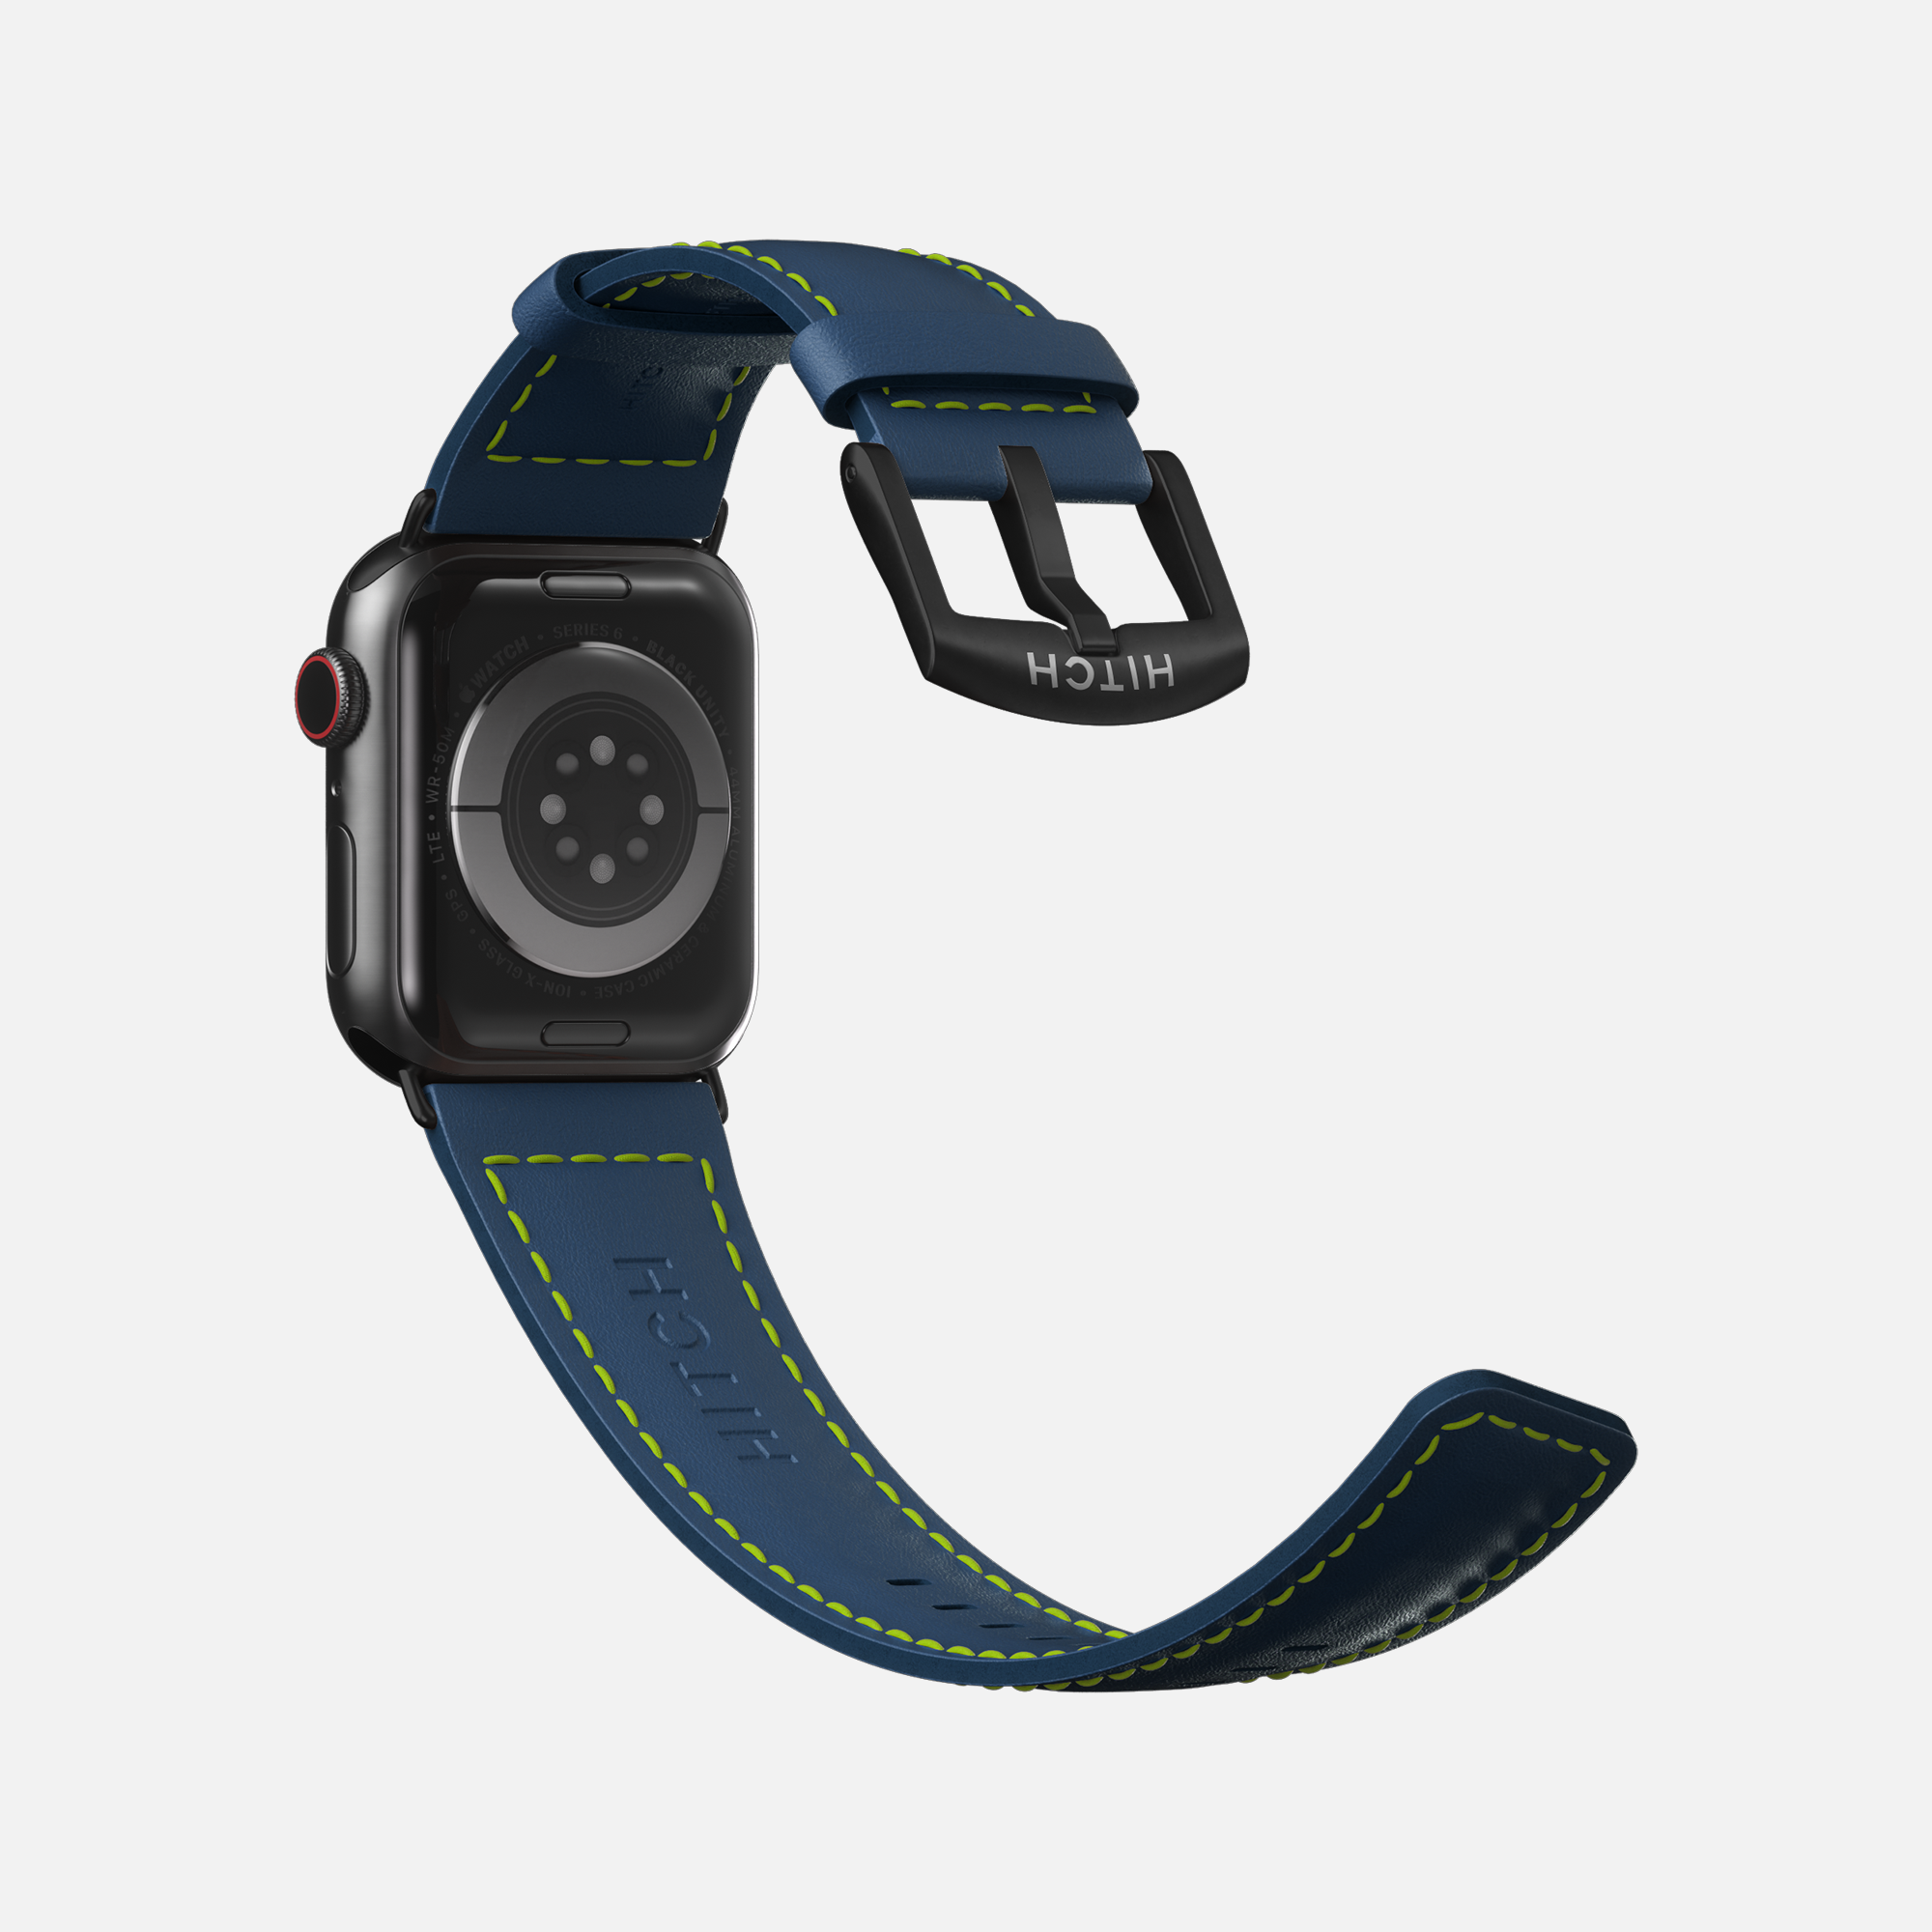 Apple  smartwatch with contrasting green stitching and navy blue leather strap design on a white background.